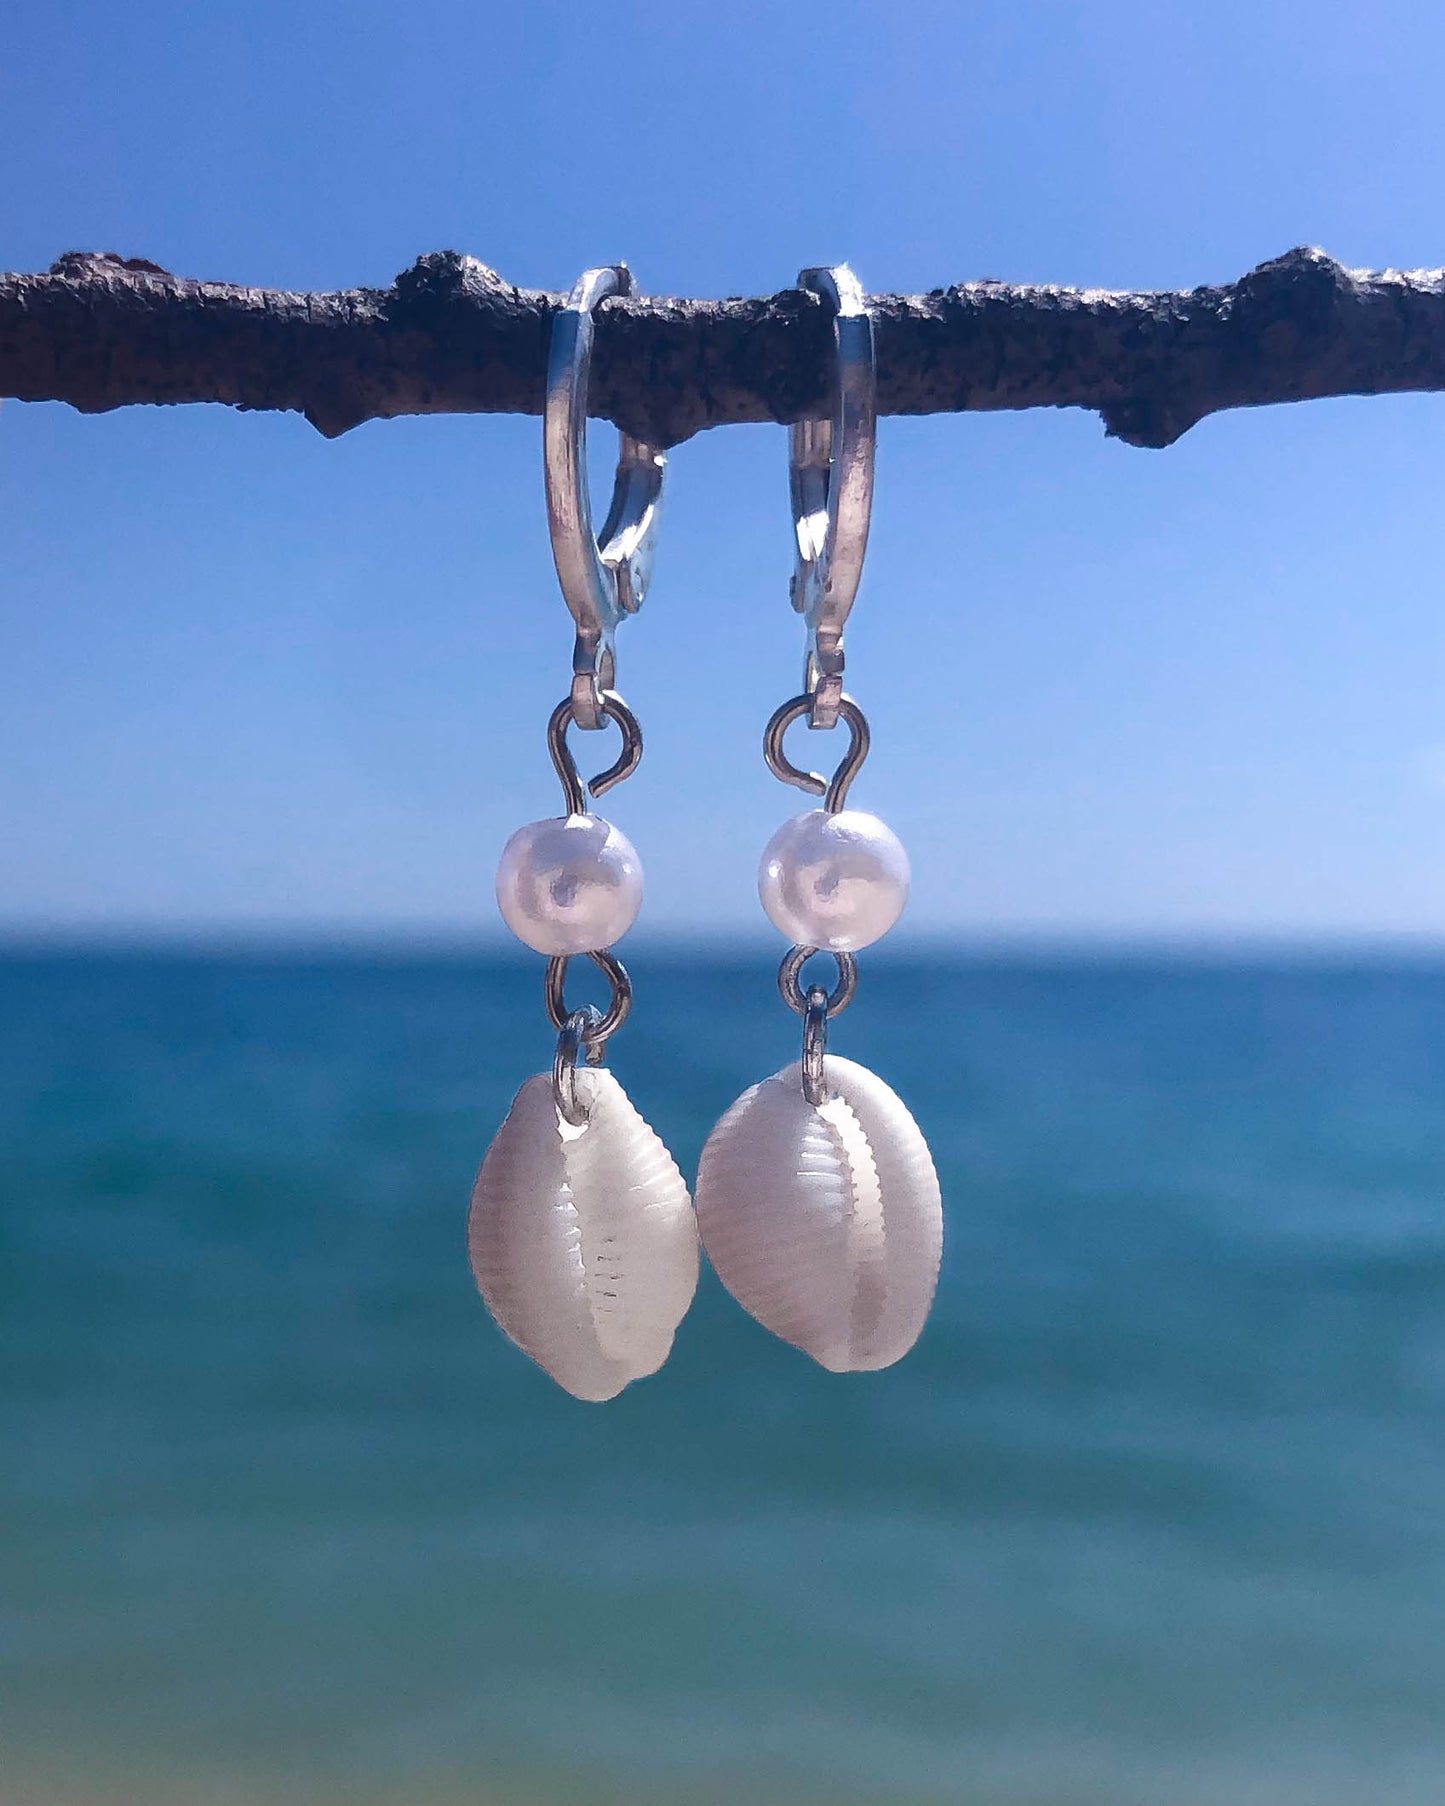 Real Cowrie Shell Freshwater Pearl Earrings, Seashell earrings with Pearl beads and Silver Hook Earrings with Cowrie Shells from Algarve Portugal, Seabylou